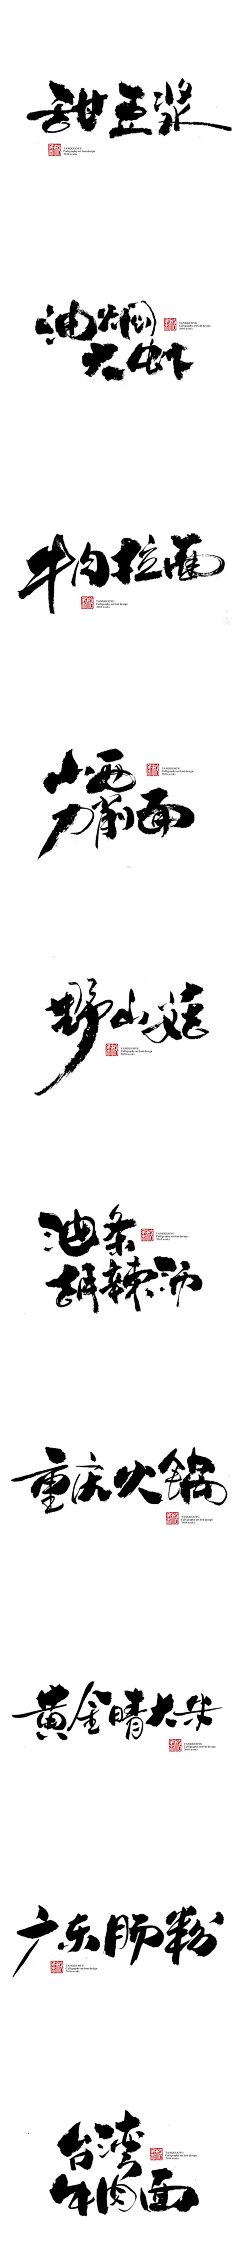 Christopher-Lee采集到字体 